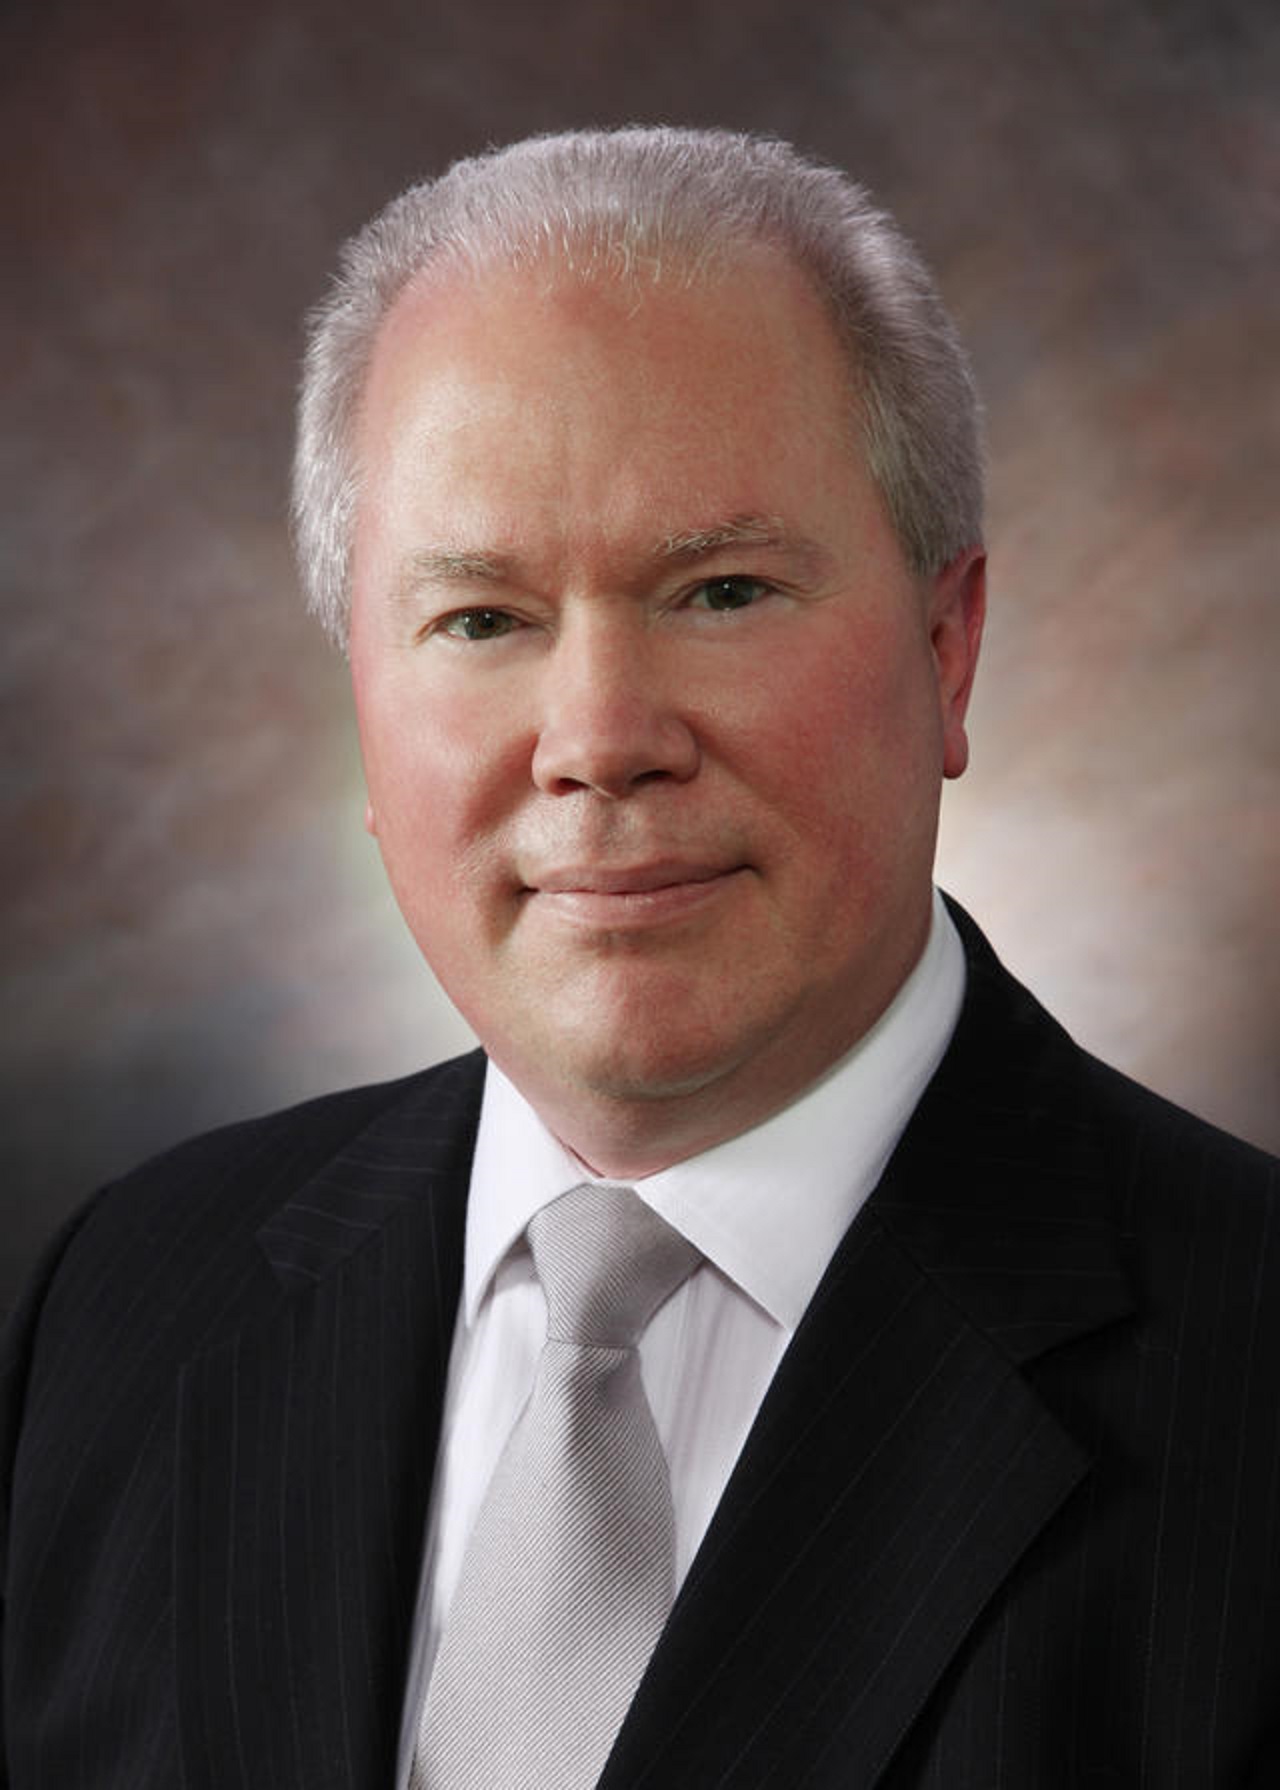 3D Systems has named Dr Jeffrey A Graves as its new president and CEO.